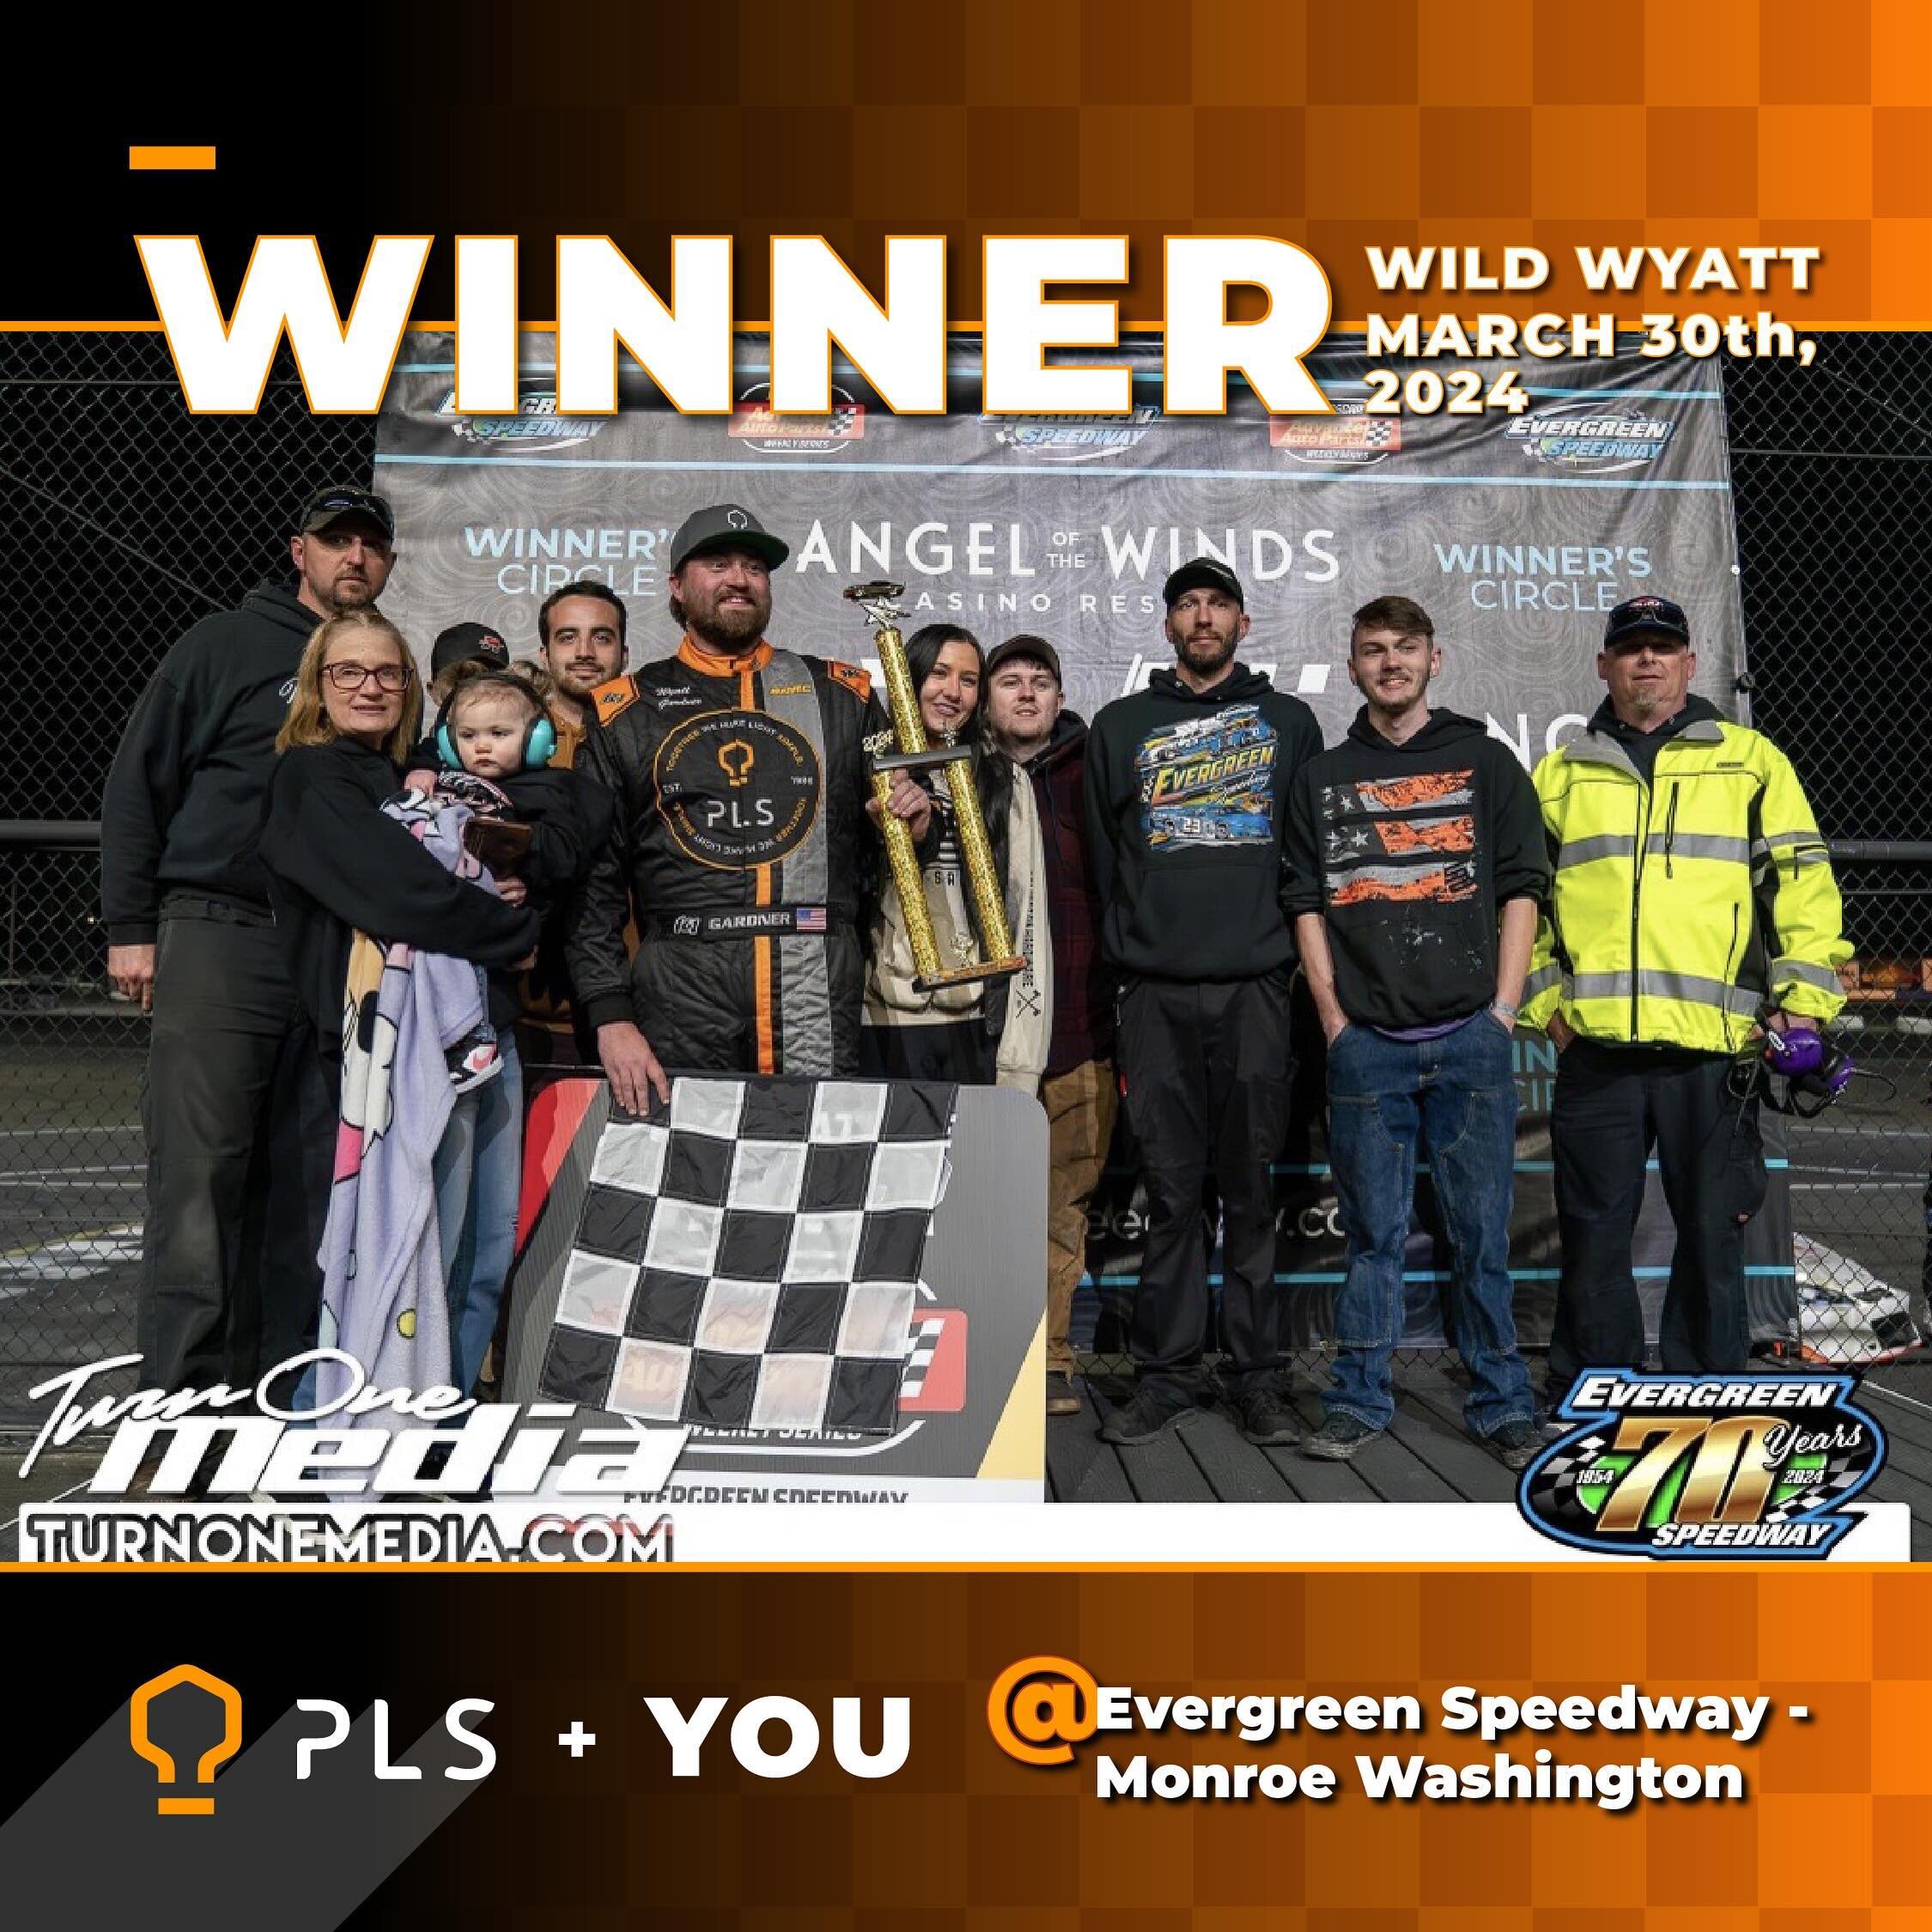 WINNER |  PLS IS RACING

PLS Project Sales - Wyatt Gardner, took first in last week&rsquo;s Advanced Auto Parts series at Evergreen Speedway!&nbsp; Come watch him race this weekend at the 55th running of the Apple Cup @ Tri-City Raceway.

https://www